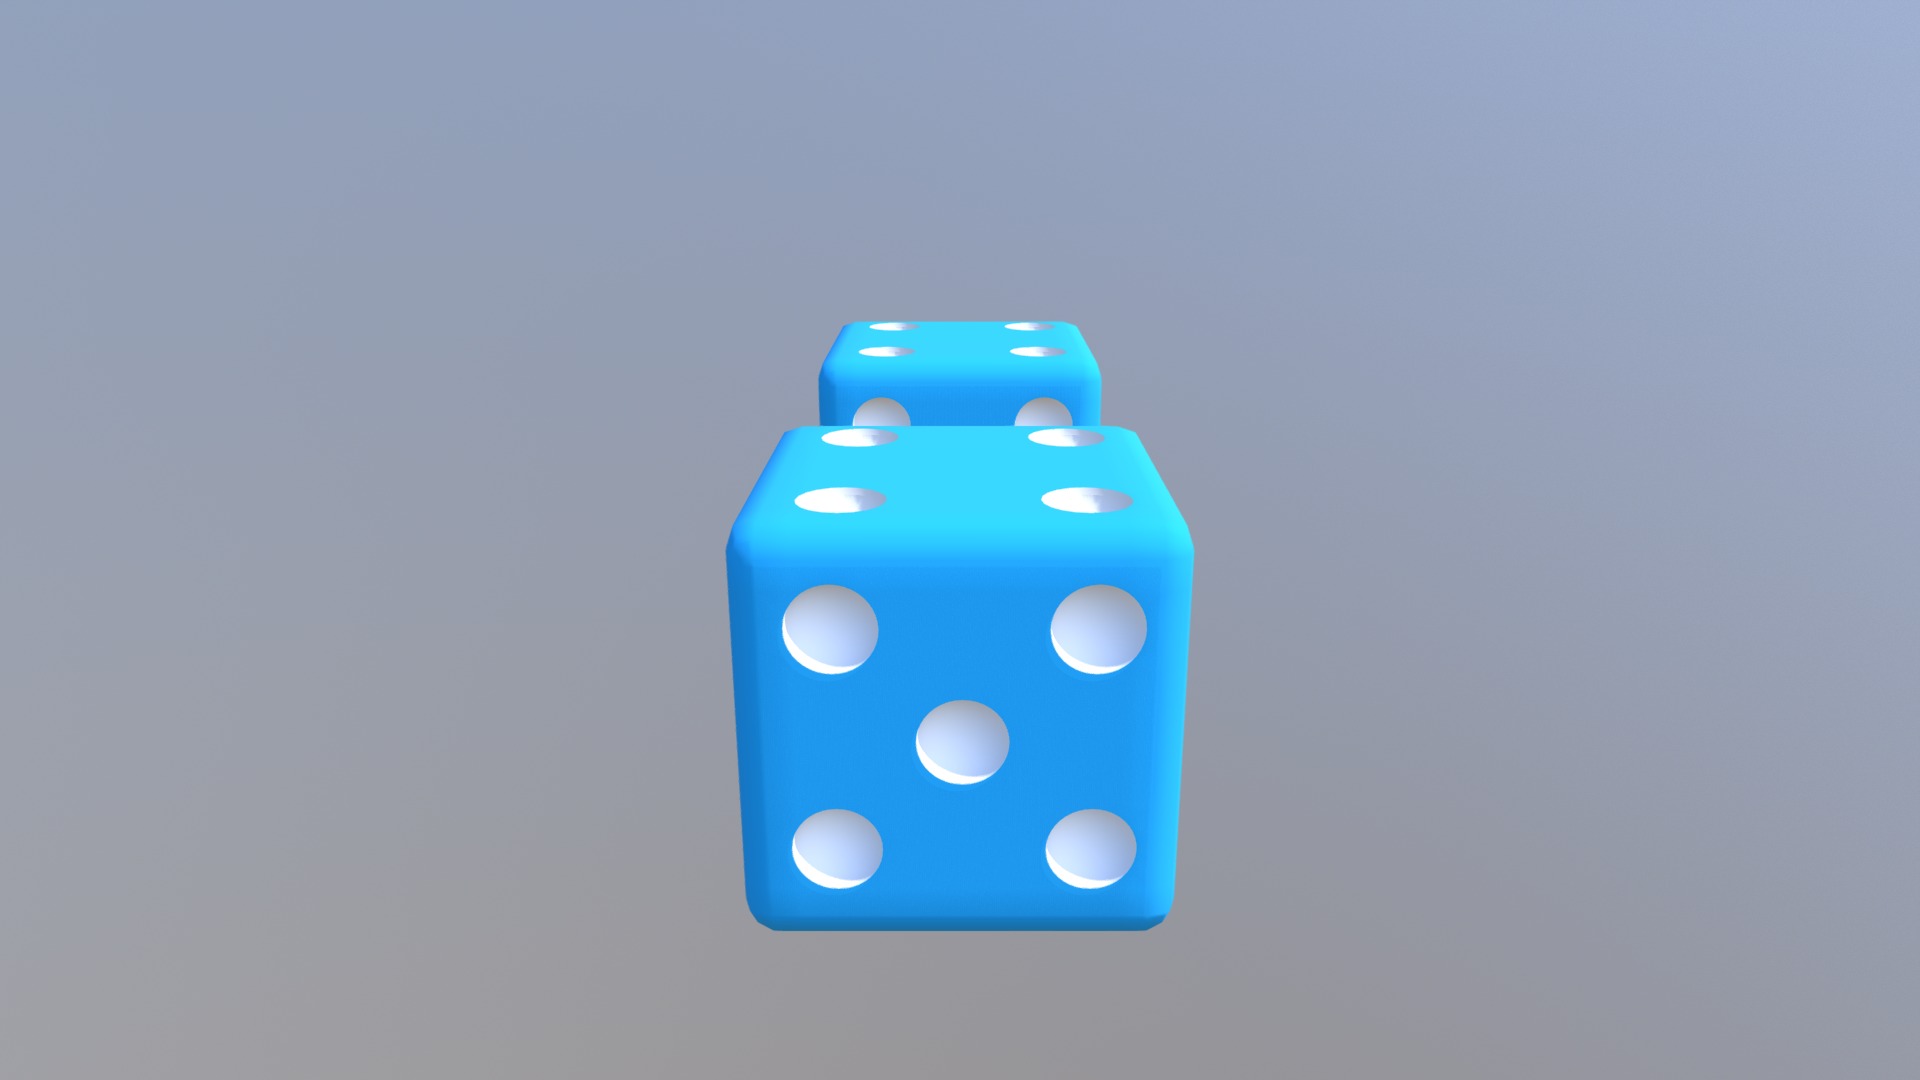 3D model Dice - This is a 3D model of the Dice. The 3D model is about a blue dice with white dots.